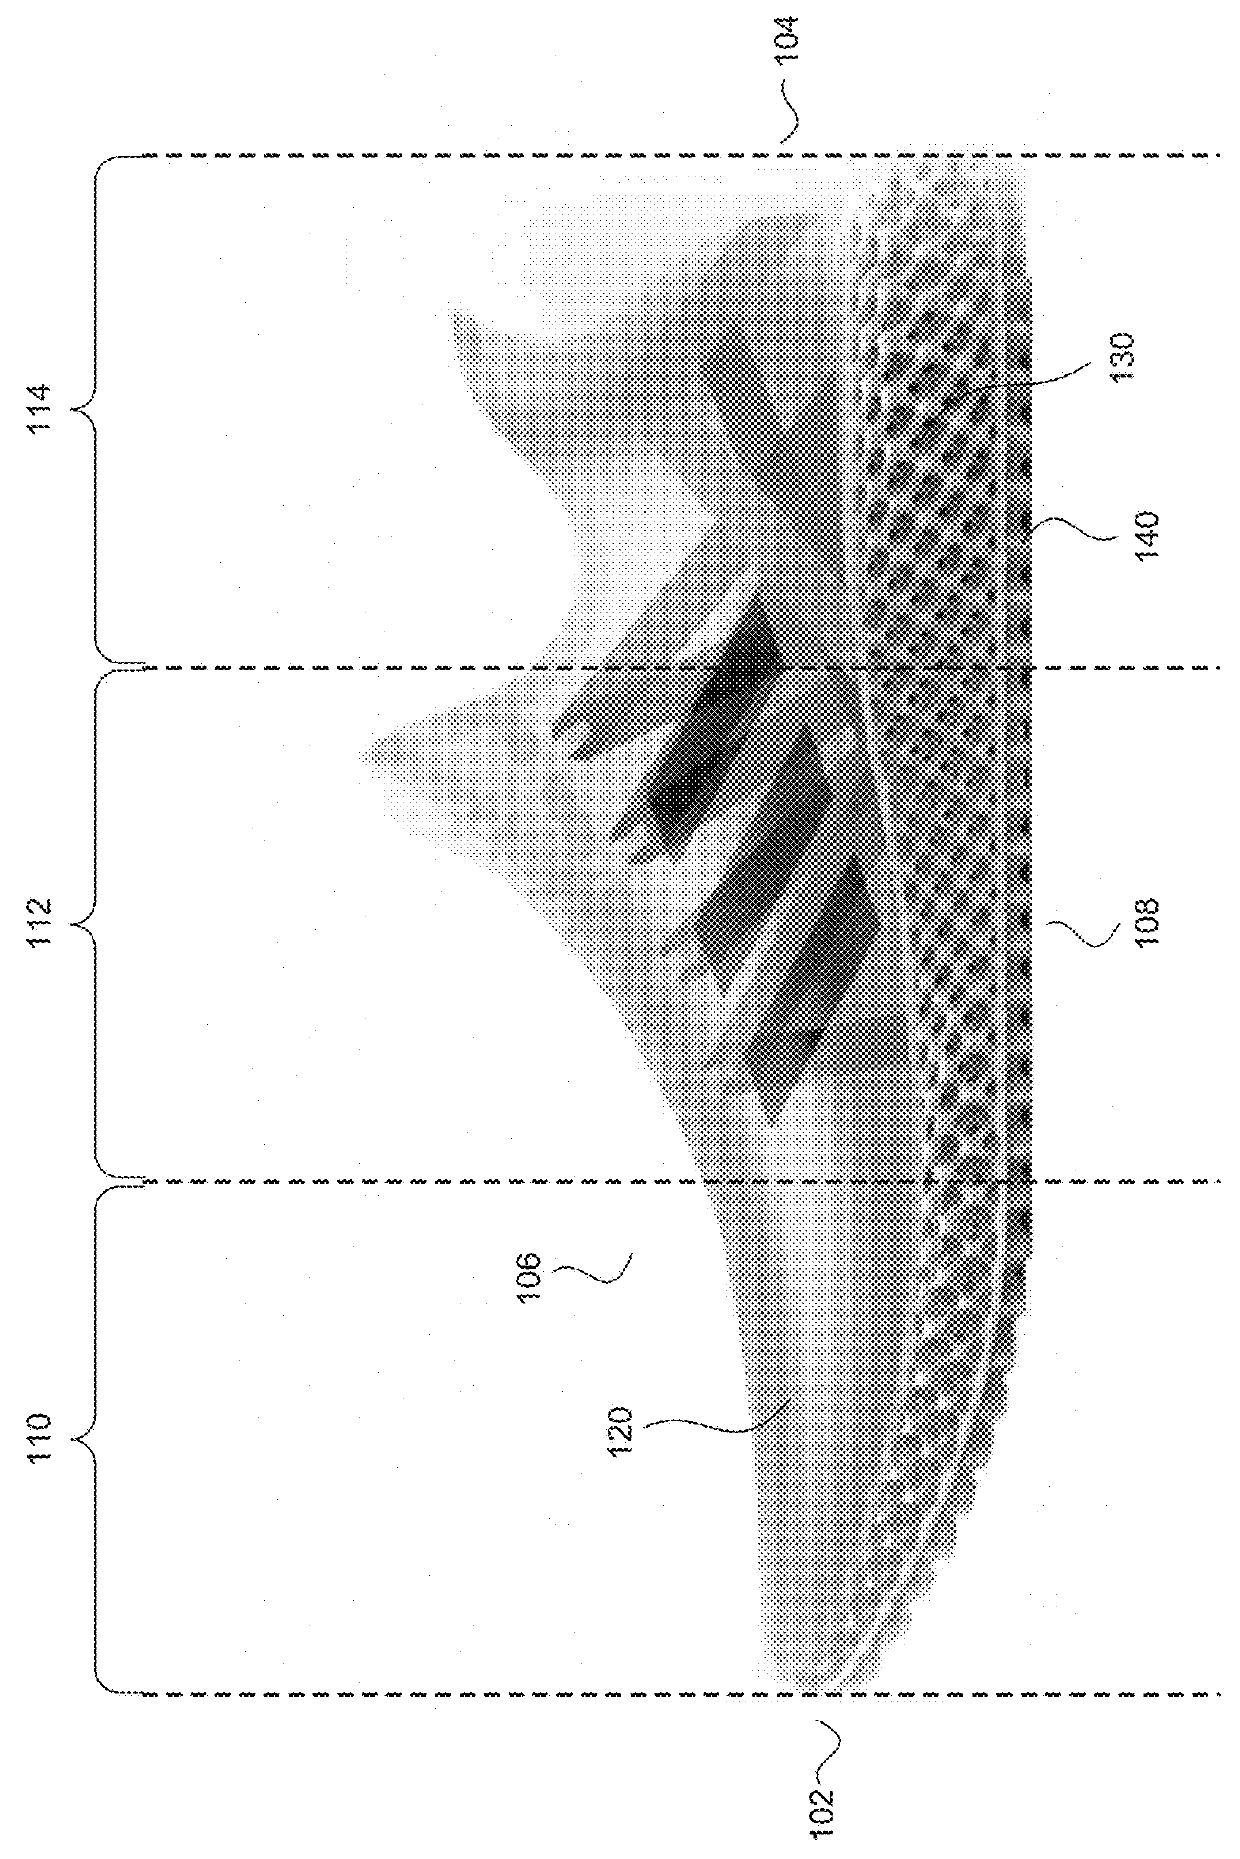 Footwear midsole with warped lattice structure and method of making the same